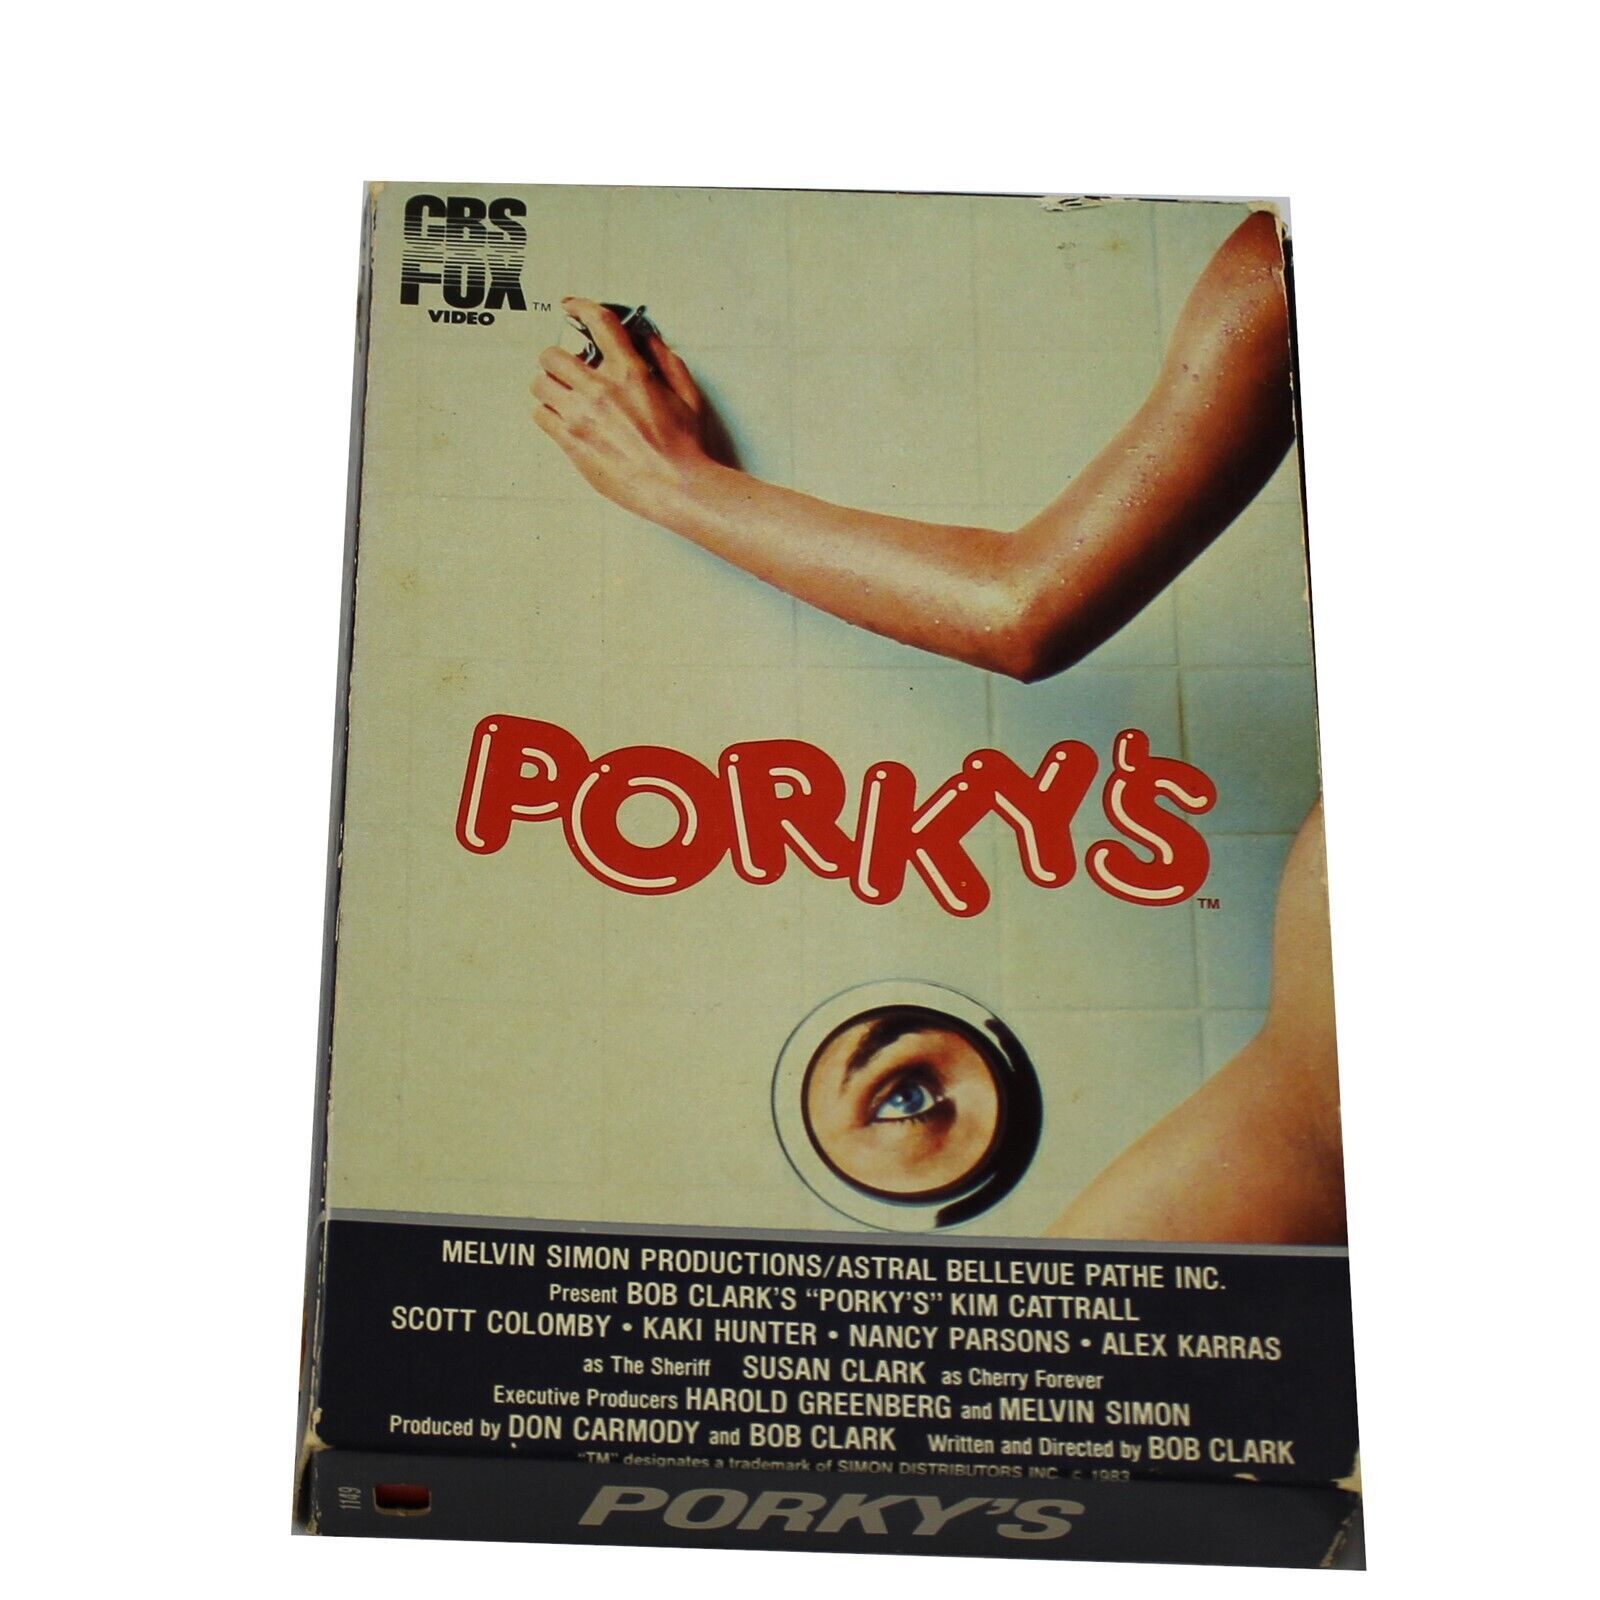 Primary image for Porky's (VHS, 1983) Kim Cattrall